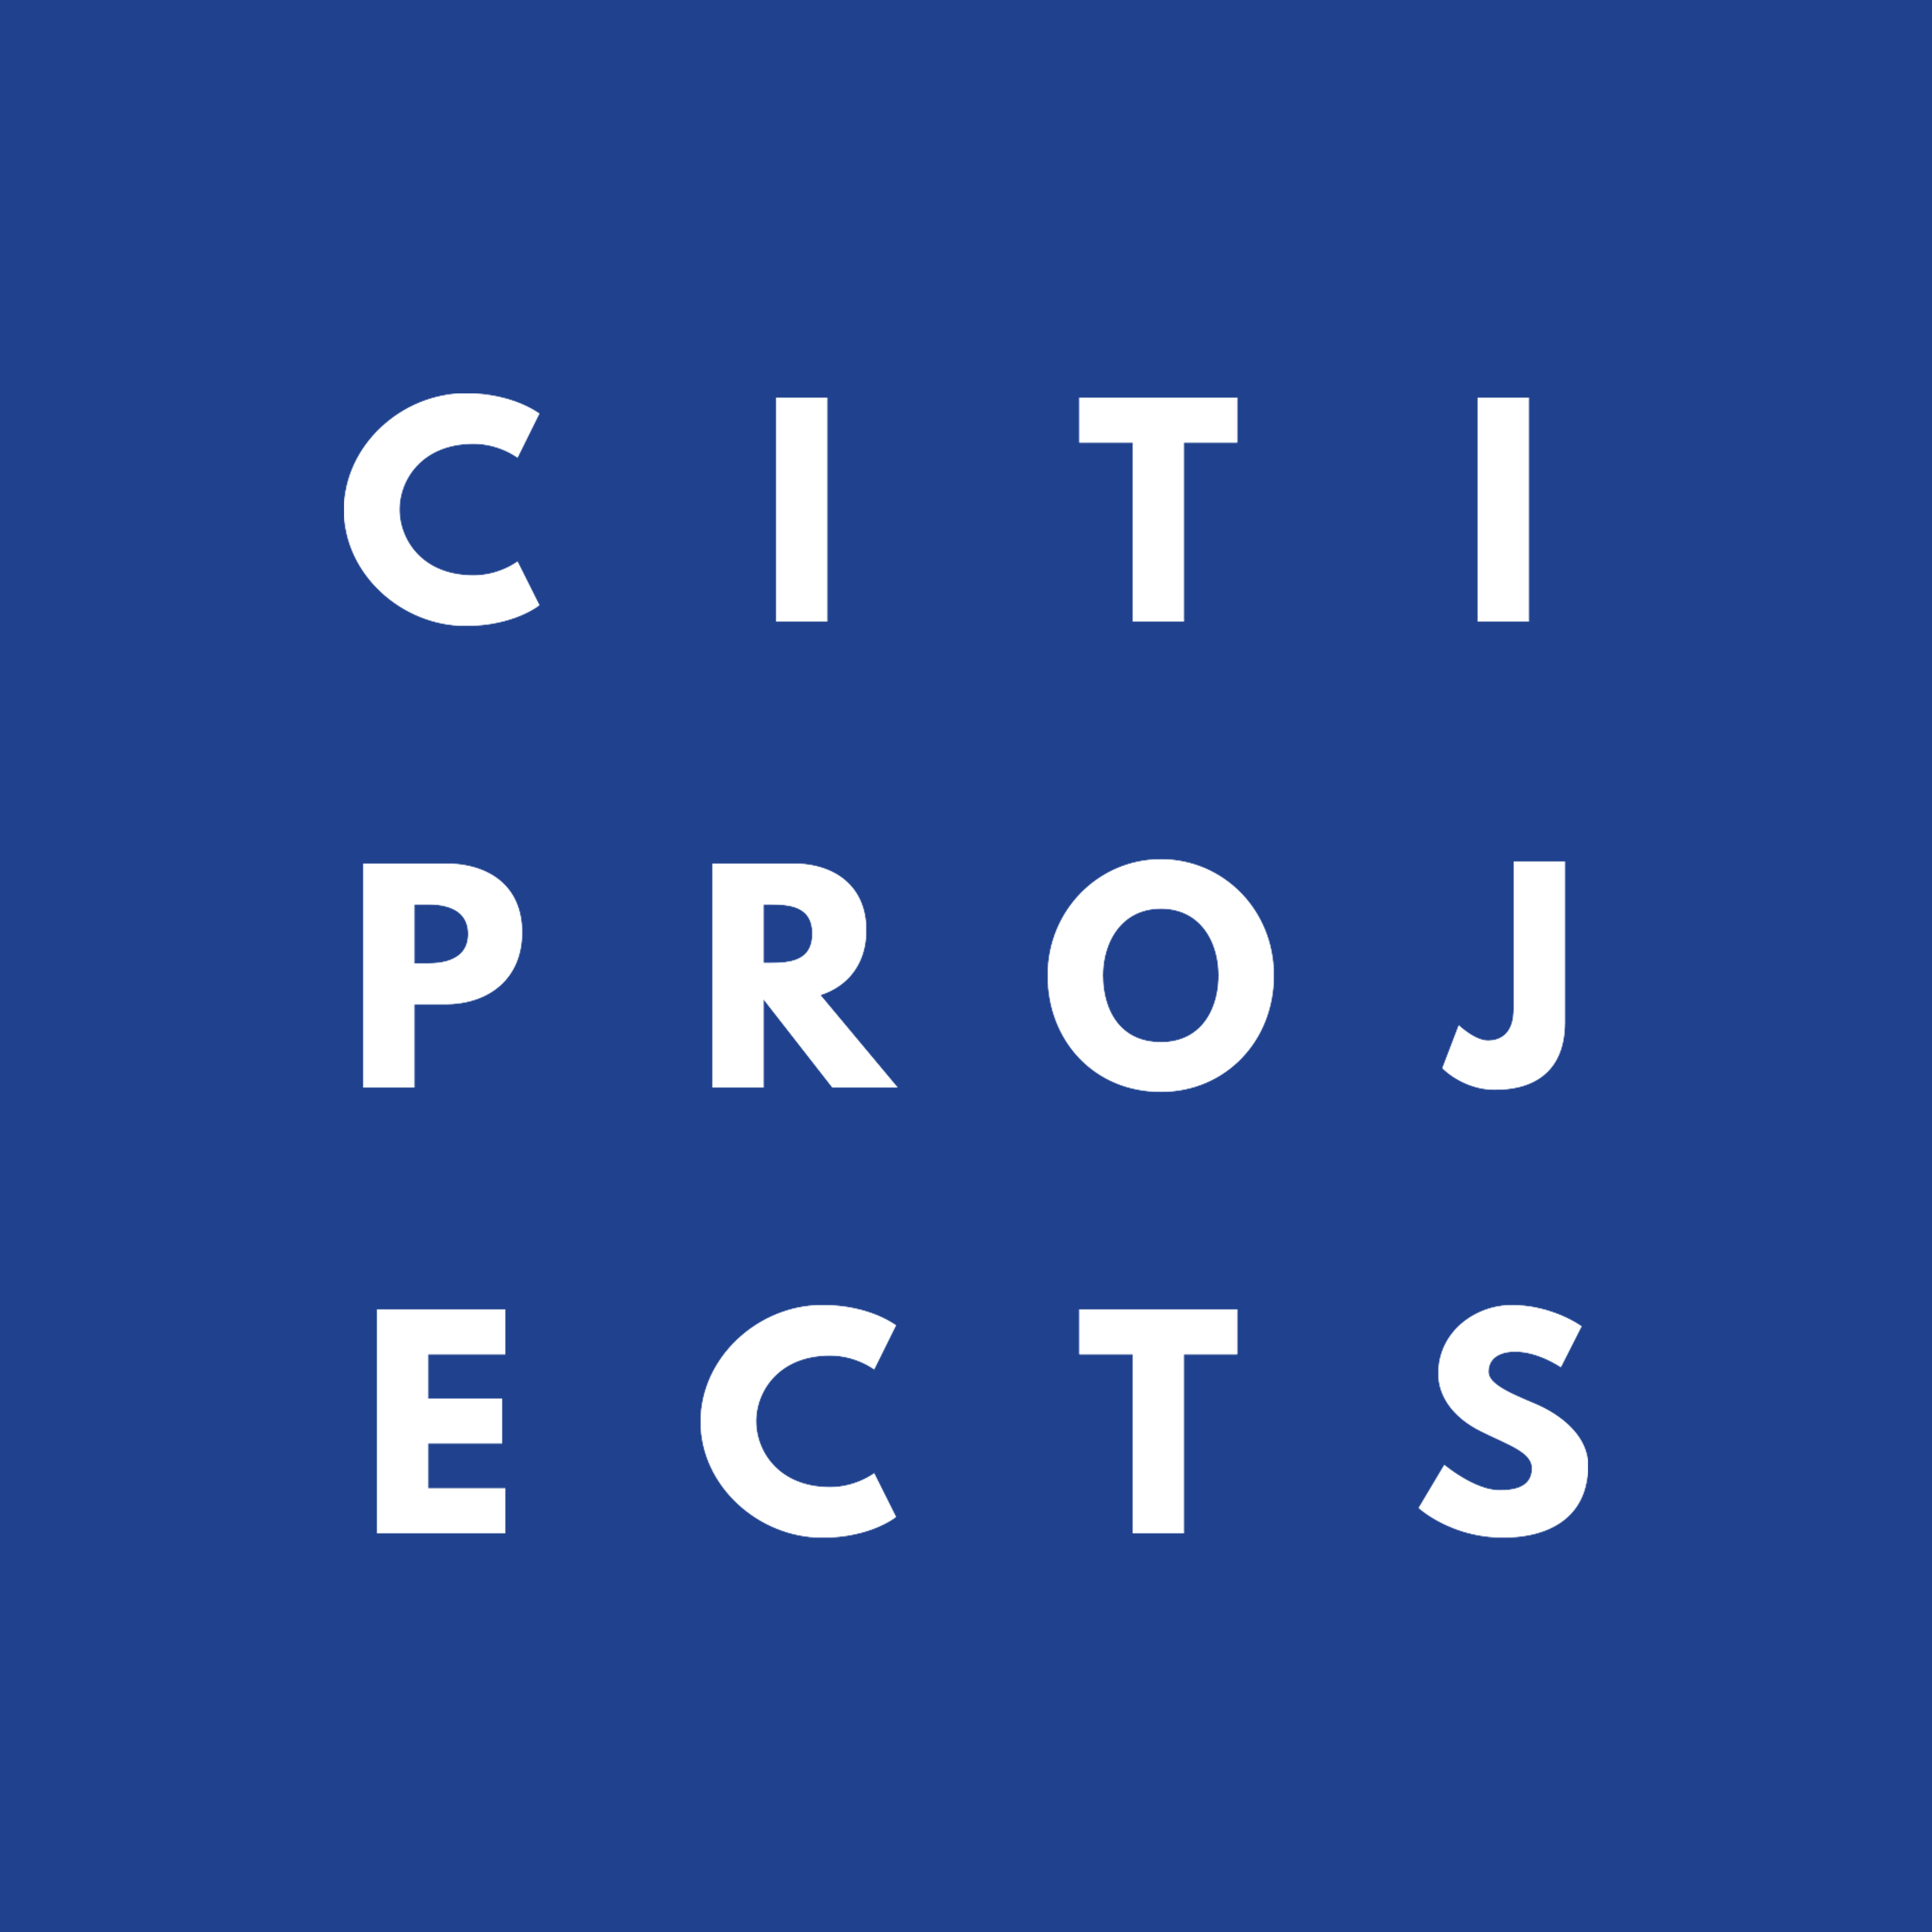 Citi Projects Interior Products 